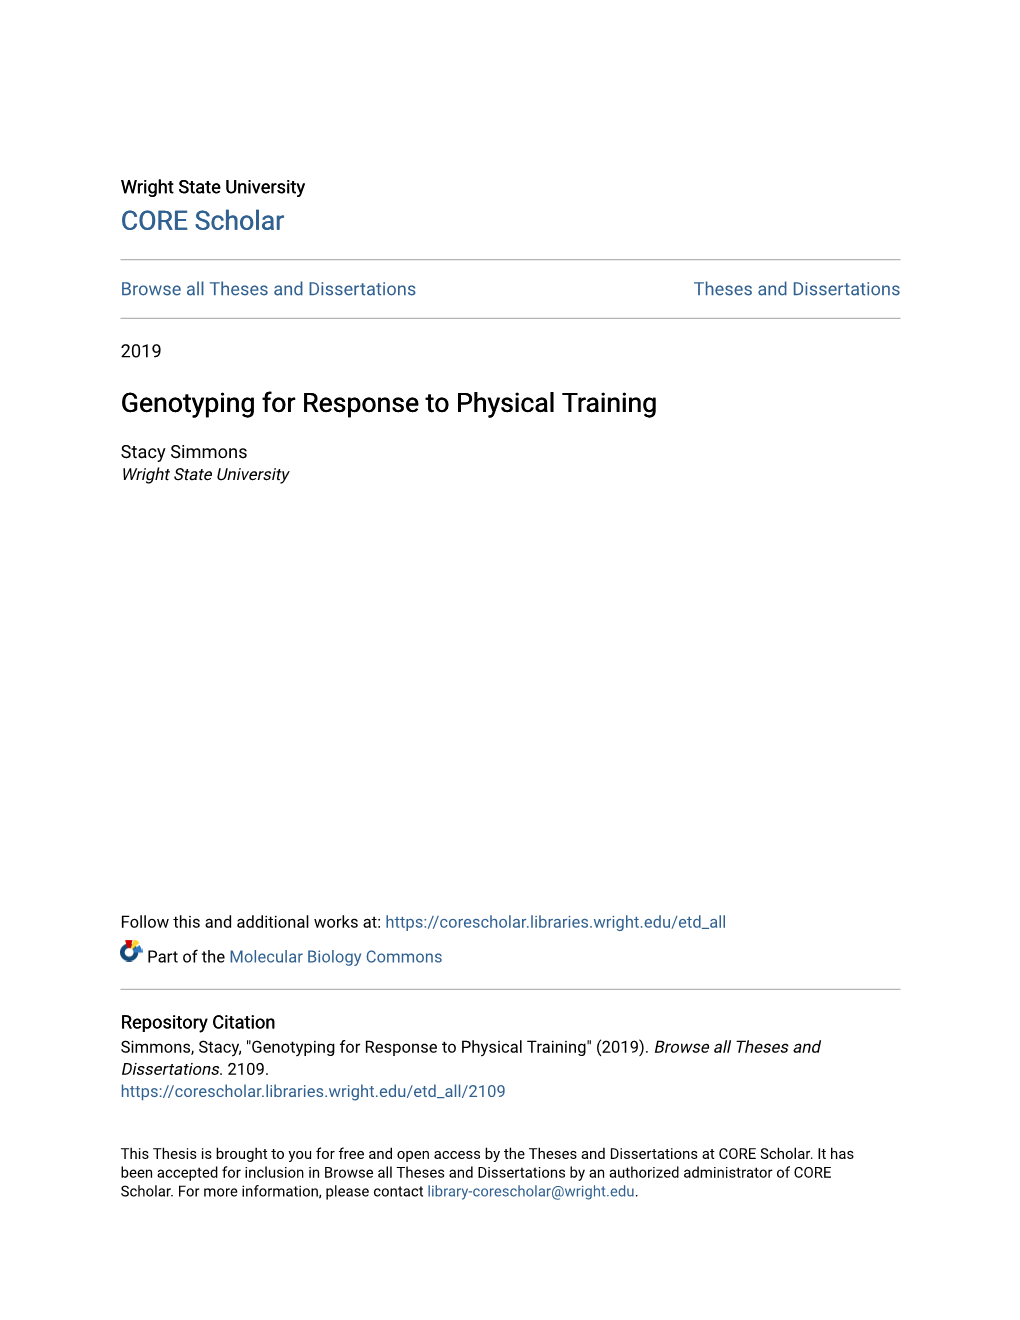 Genotyping for Response to Physical Training